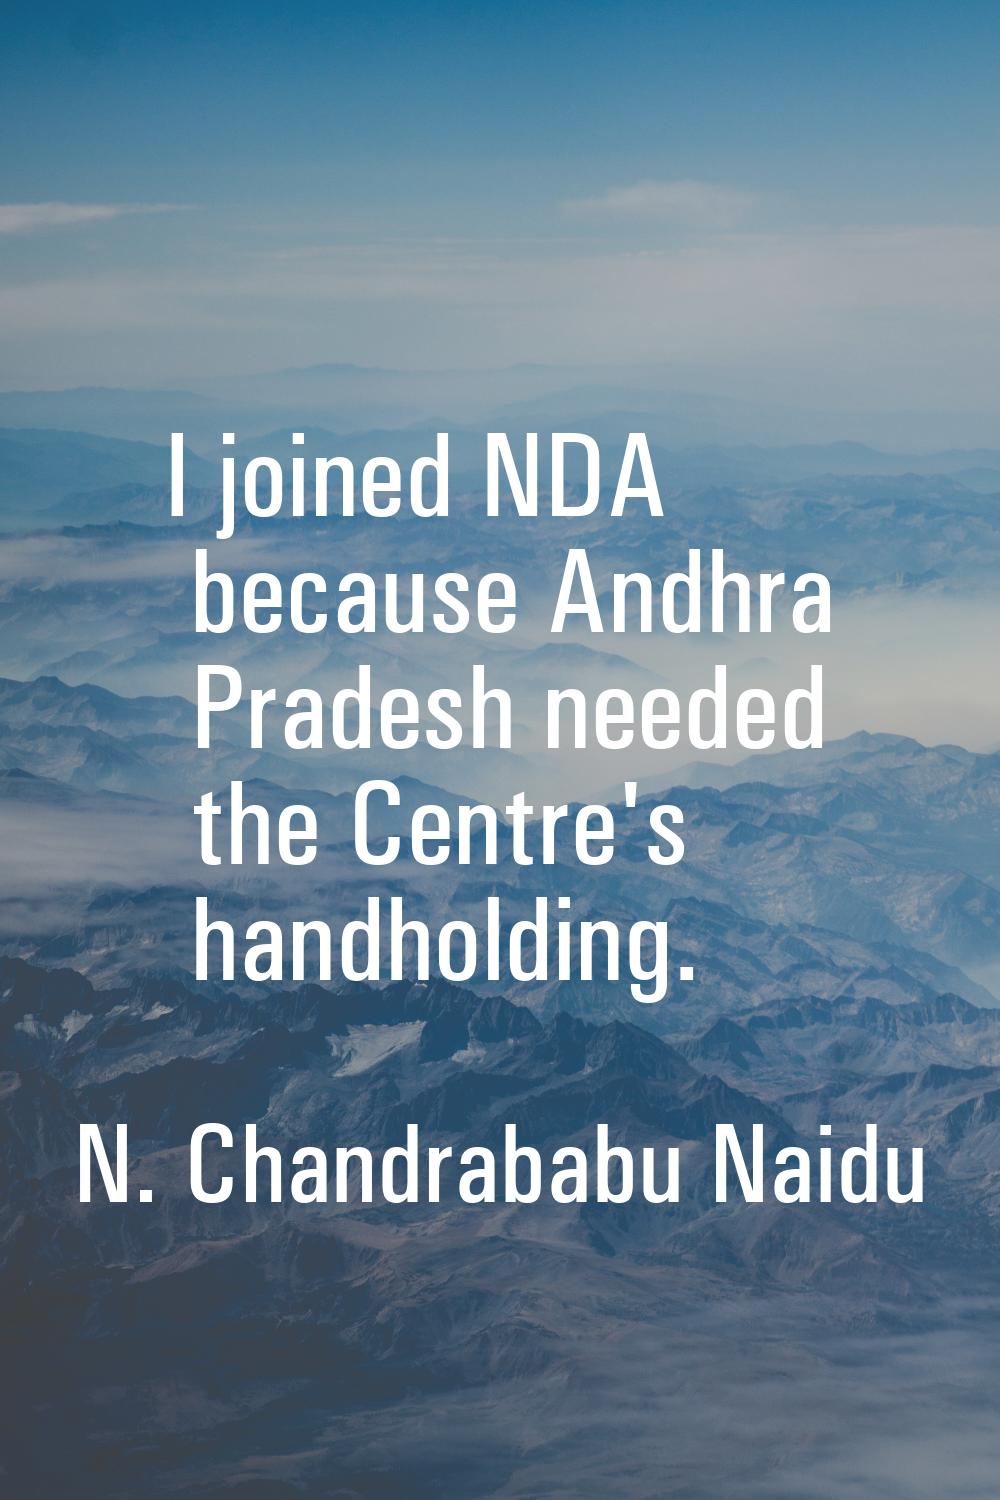 I joined NDA because Andhra Pradesh needed the Centre's handholding.